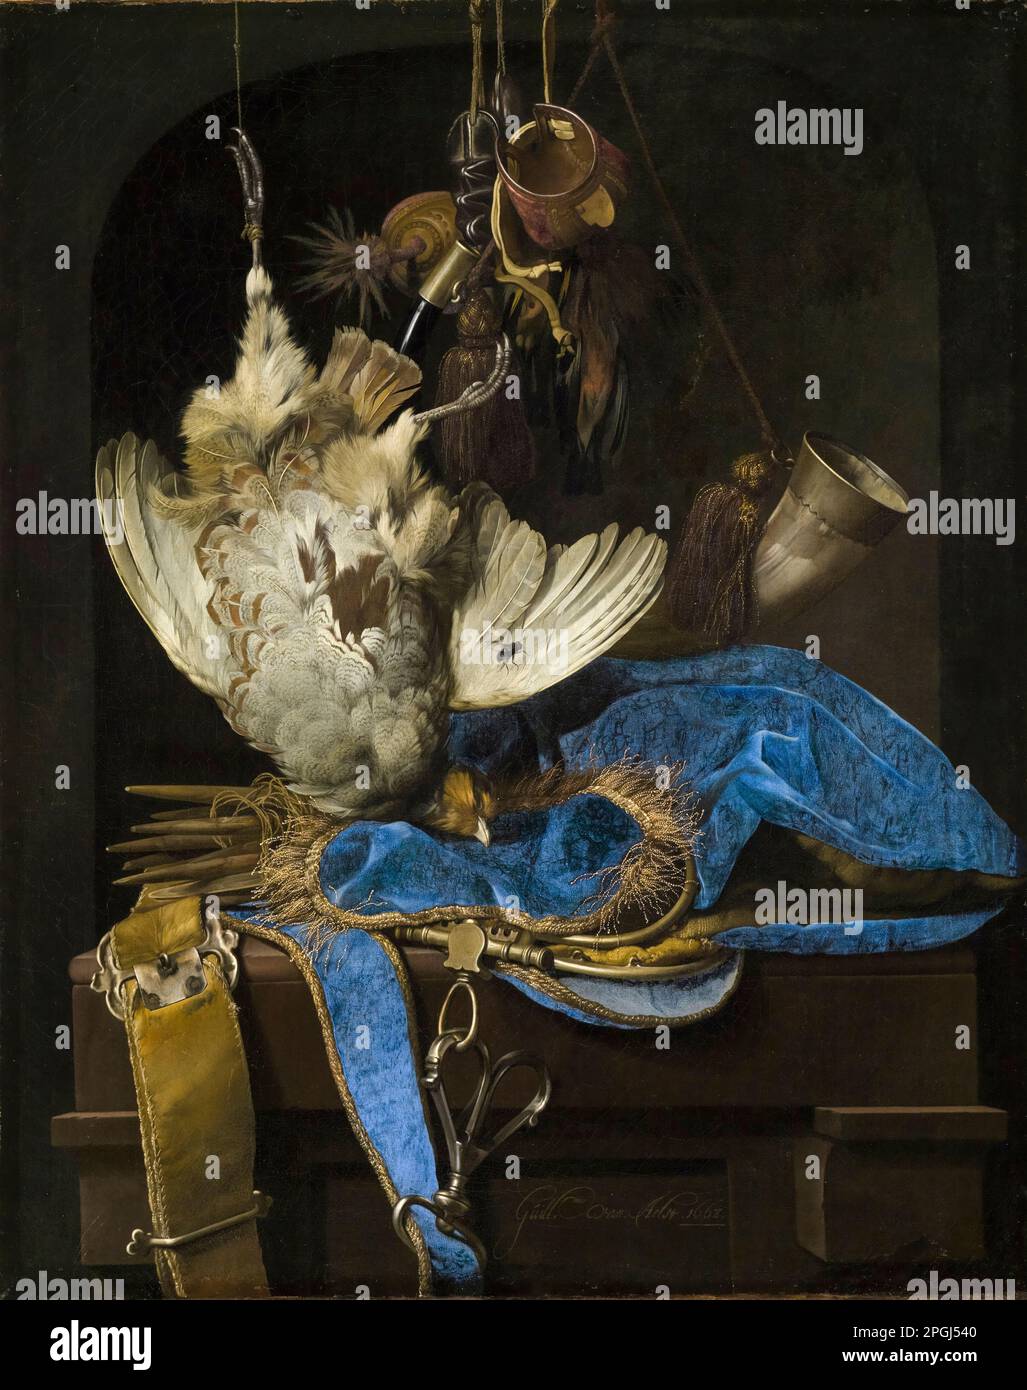 Willem van Aelst, Still-Life with Hunting Equipment and Dead Birds, painting in oil on canvas, 1668 Stock Photo